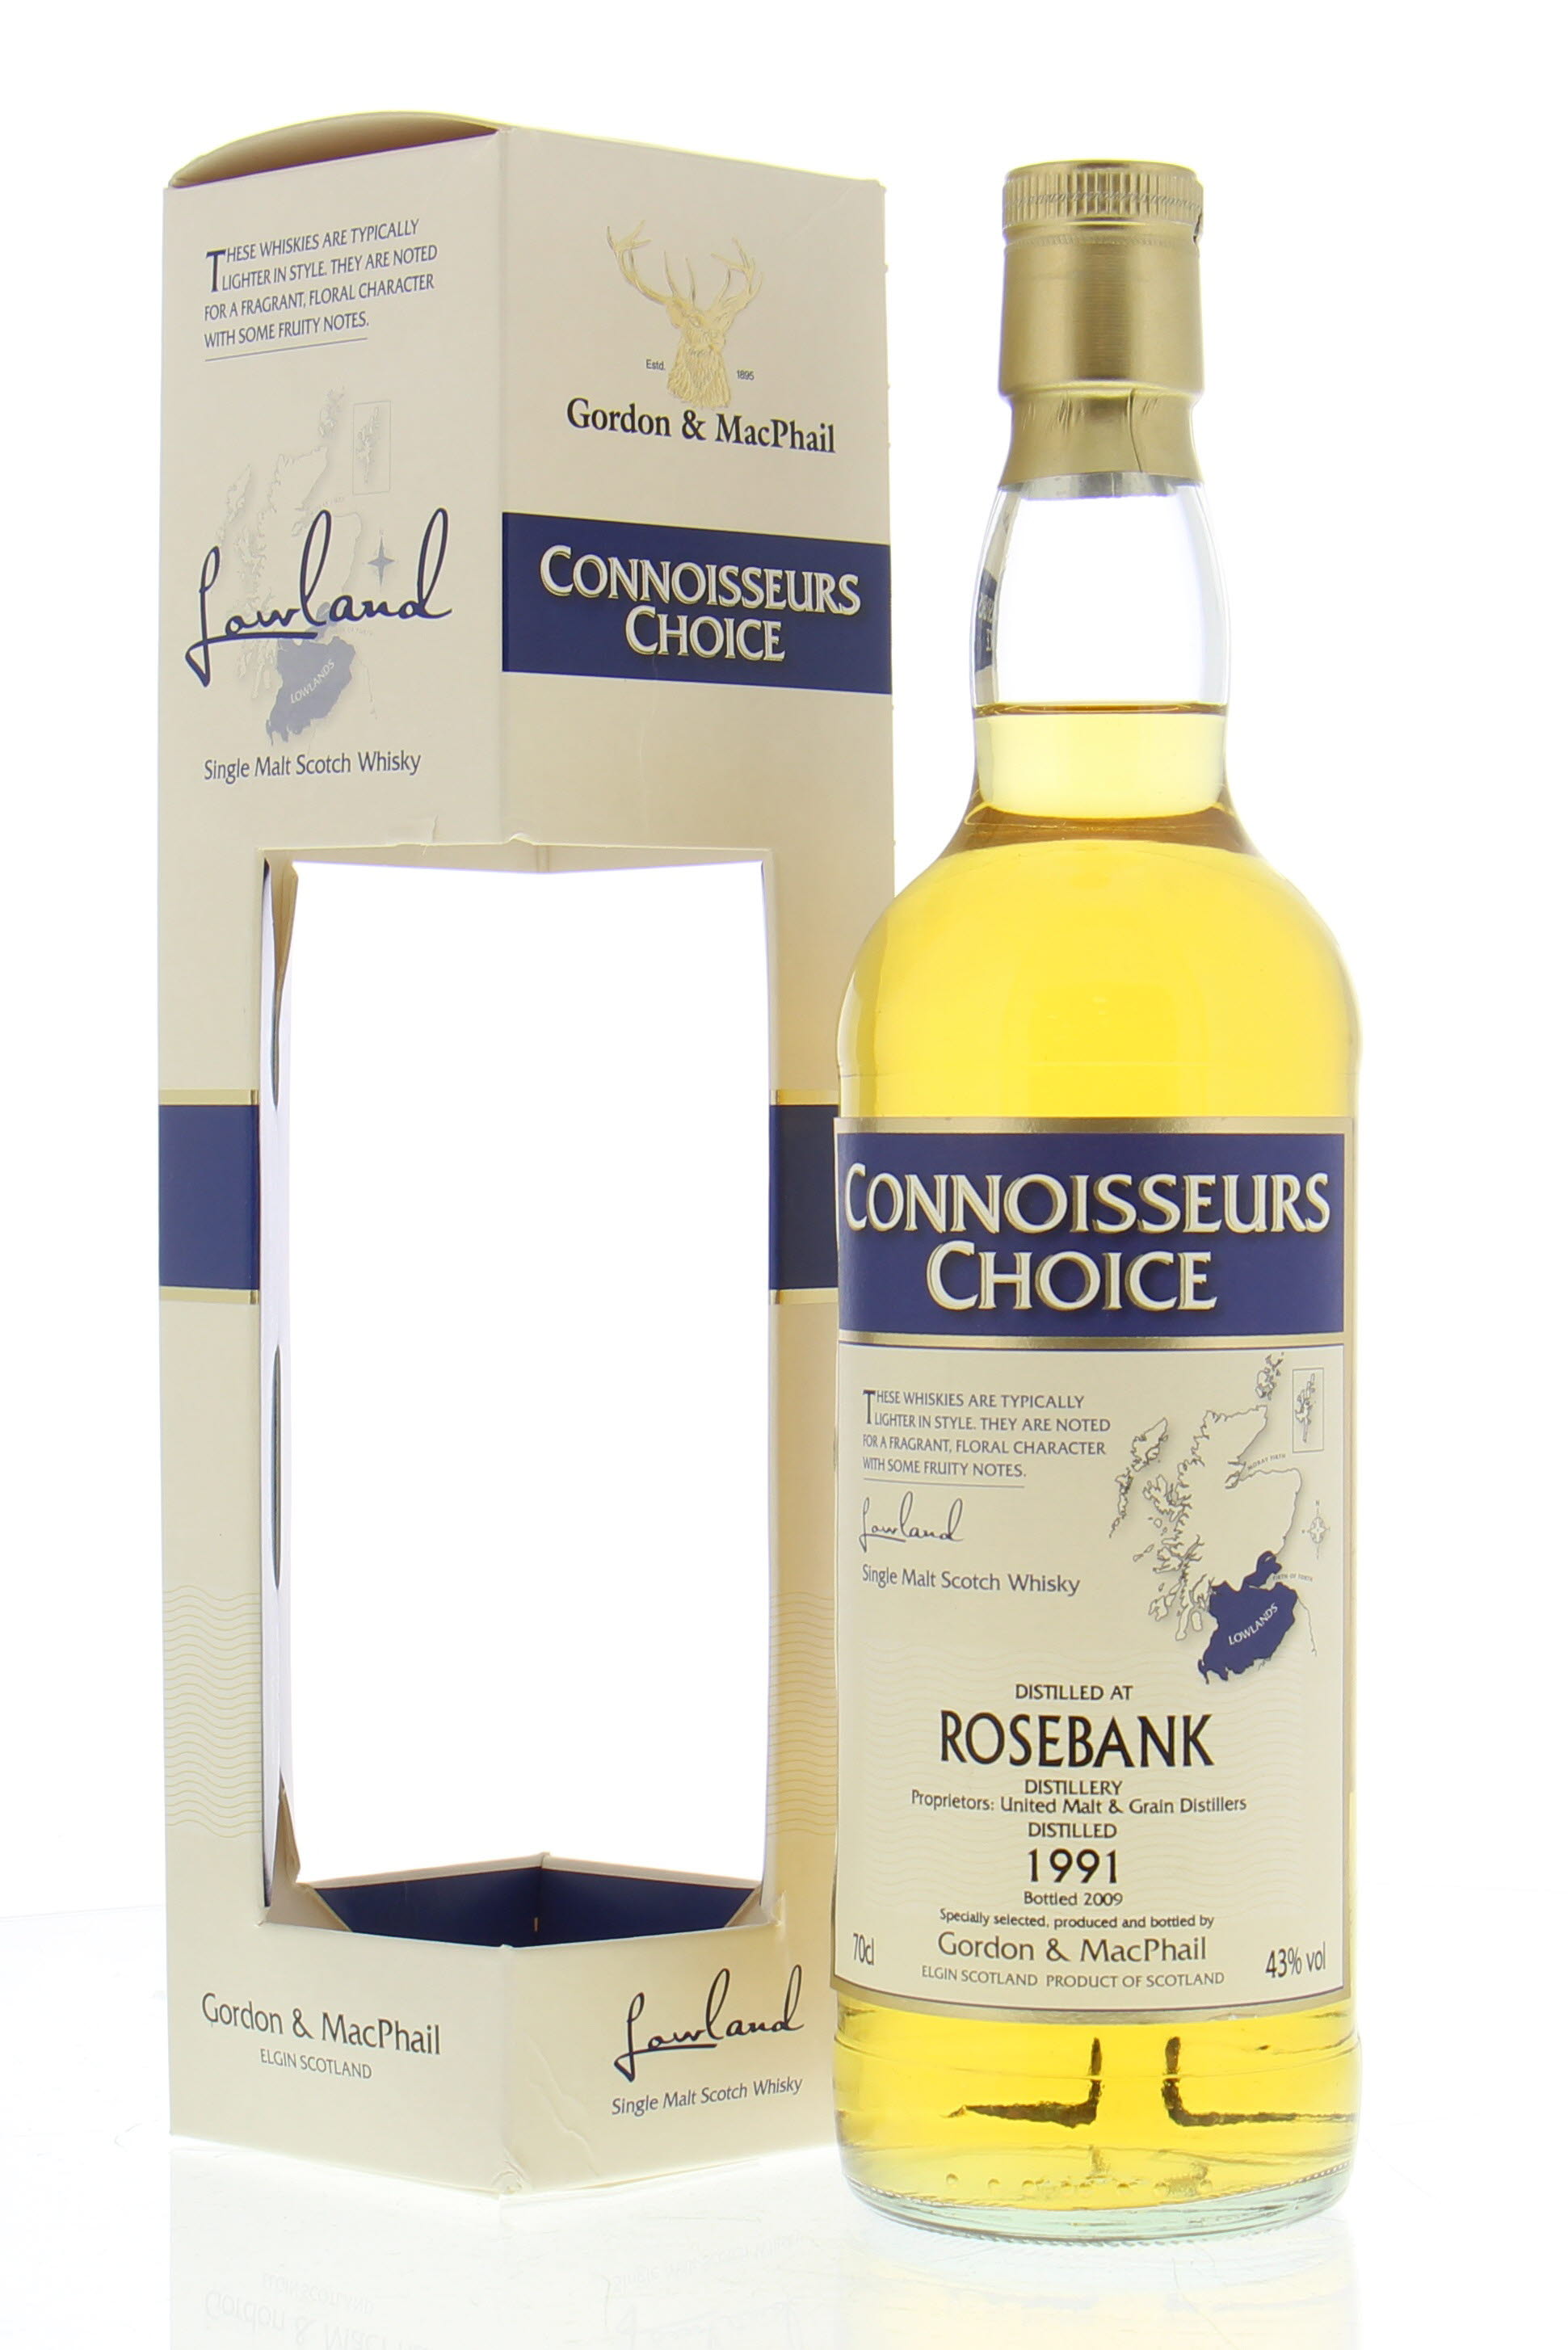 Rosebank - 17 Years Old Gordon & MacPhail Connoisseurs Choice 43% 1991 In Original Container